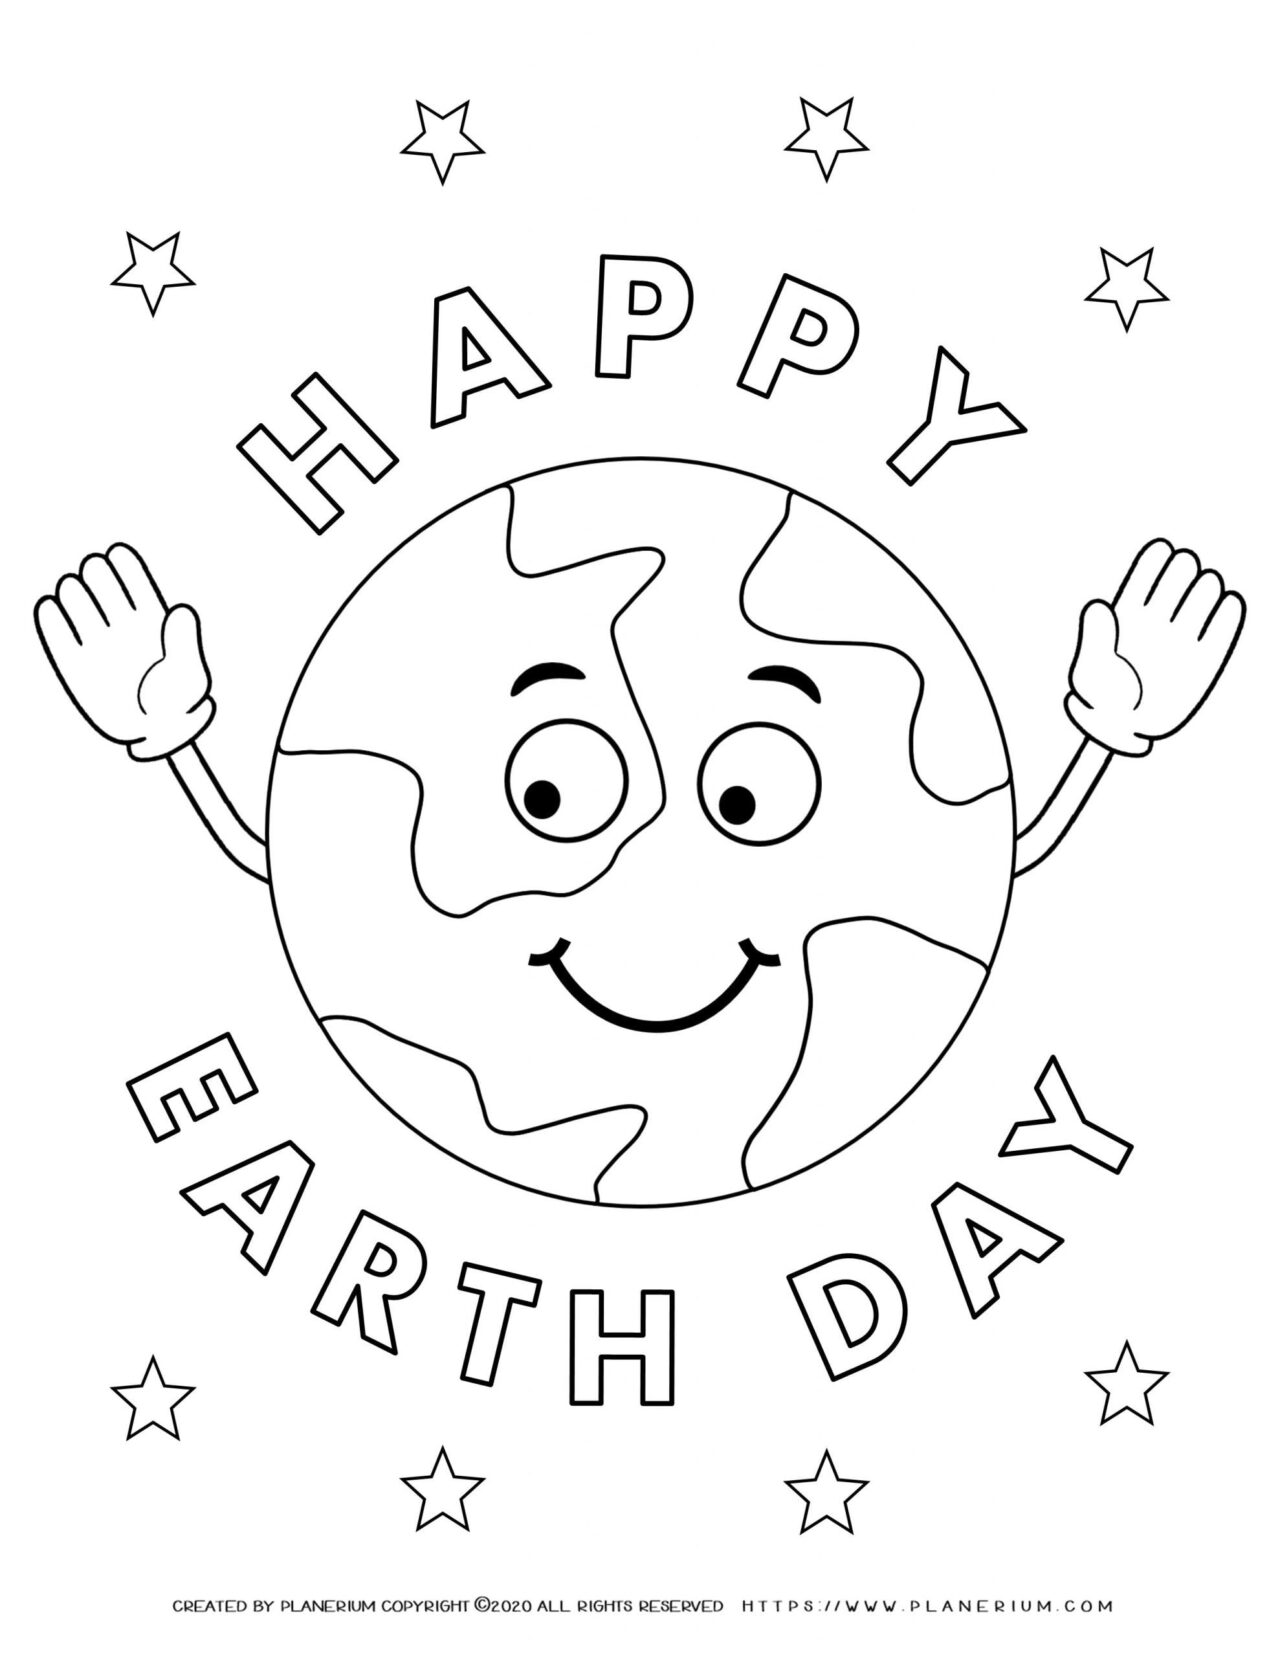 earth-day-coloring-page-free-printable-happy-earth-day-coloring-page